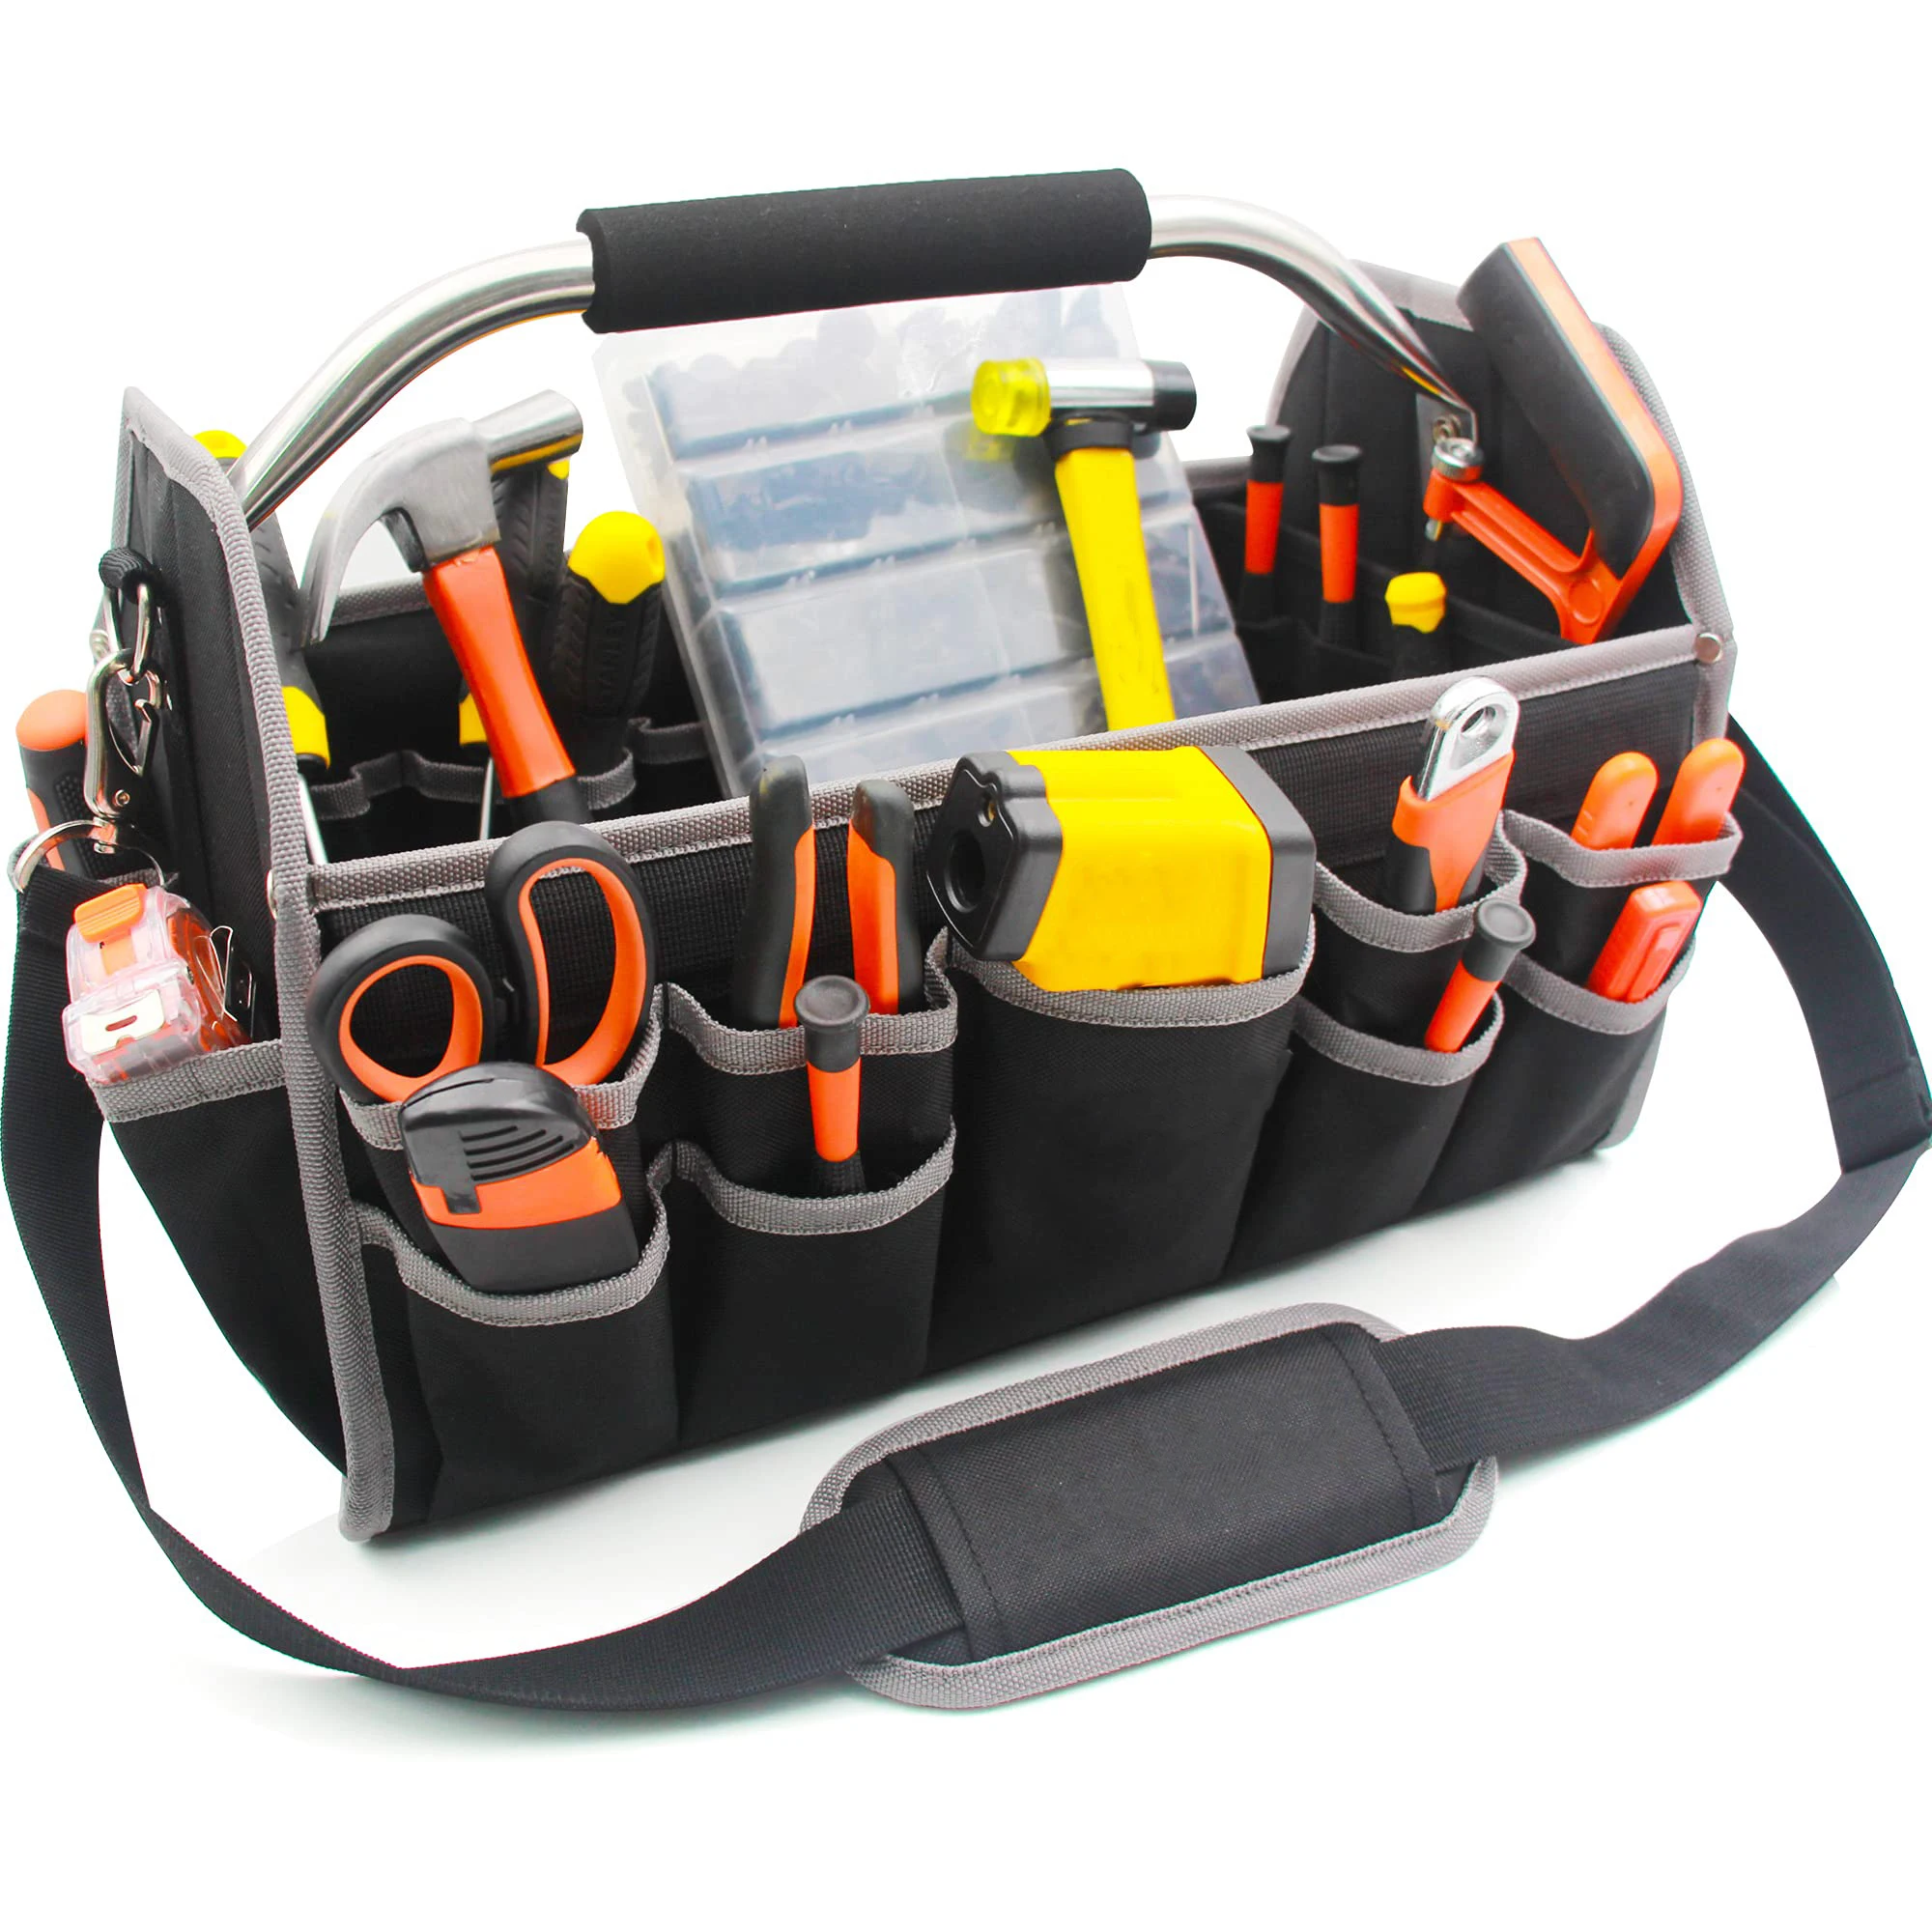 16in Tool Bag, Electrician Bag Open Top Tool Bags Many Pockets Can Hold Many Tools Waterproof Anti-Fall Storage Bag